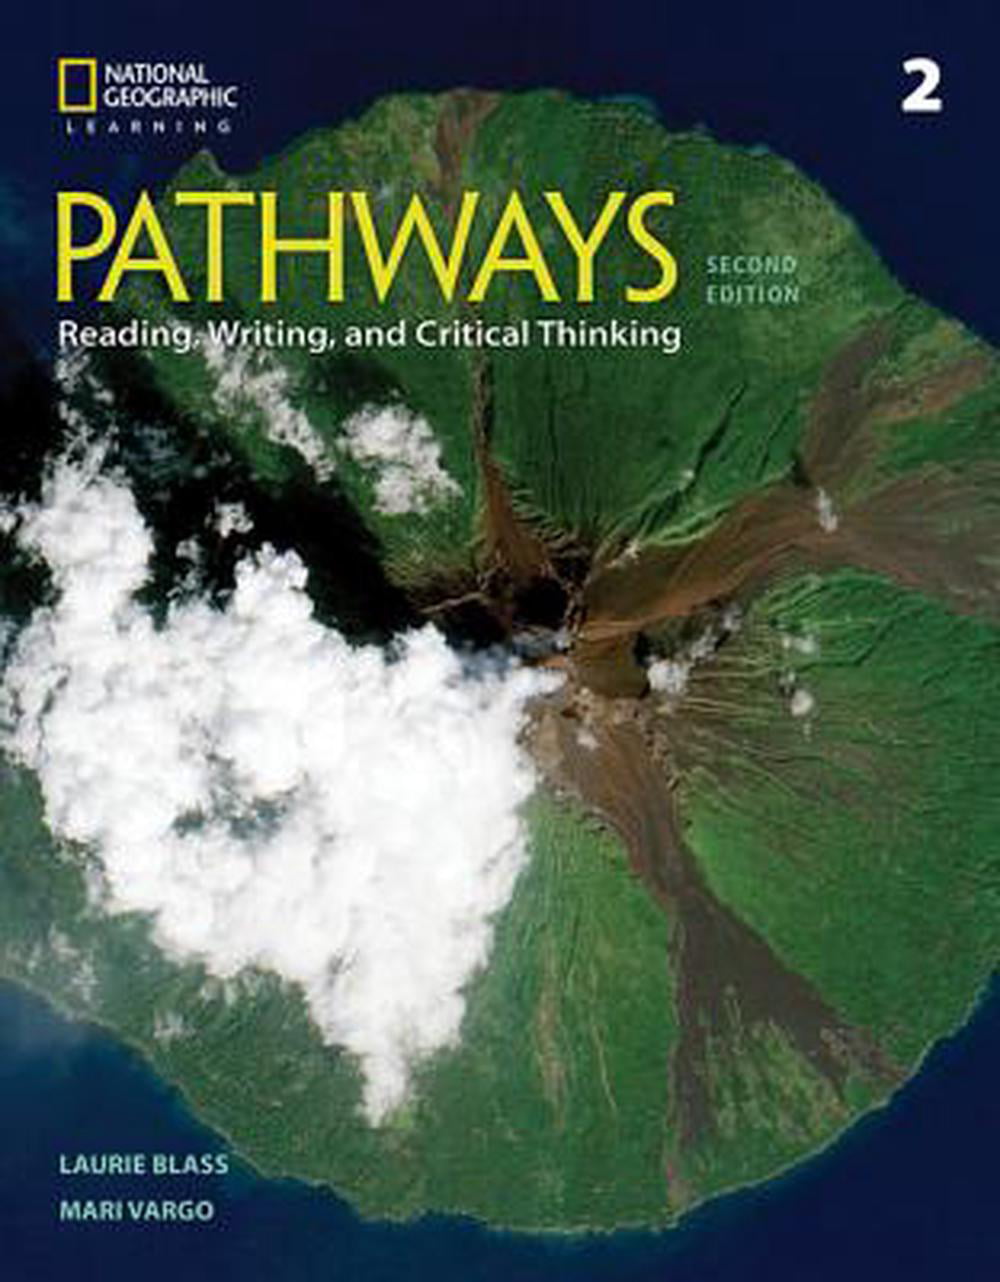 pathways 1 reading writing and critical thinking teacher's guide